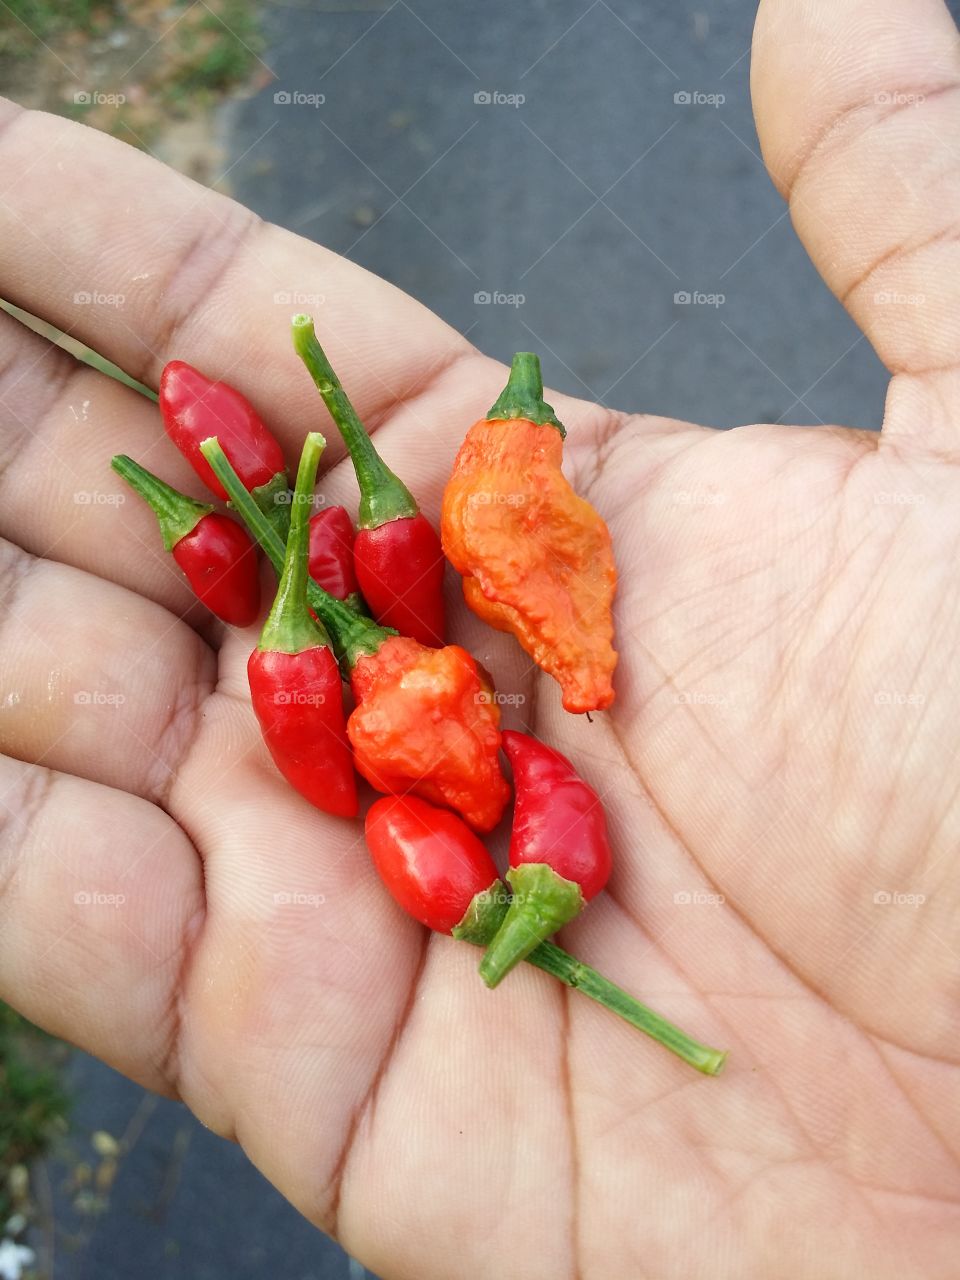 Hot Chilis. fresh from the garden hot red malaysian chilis